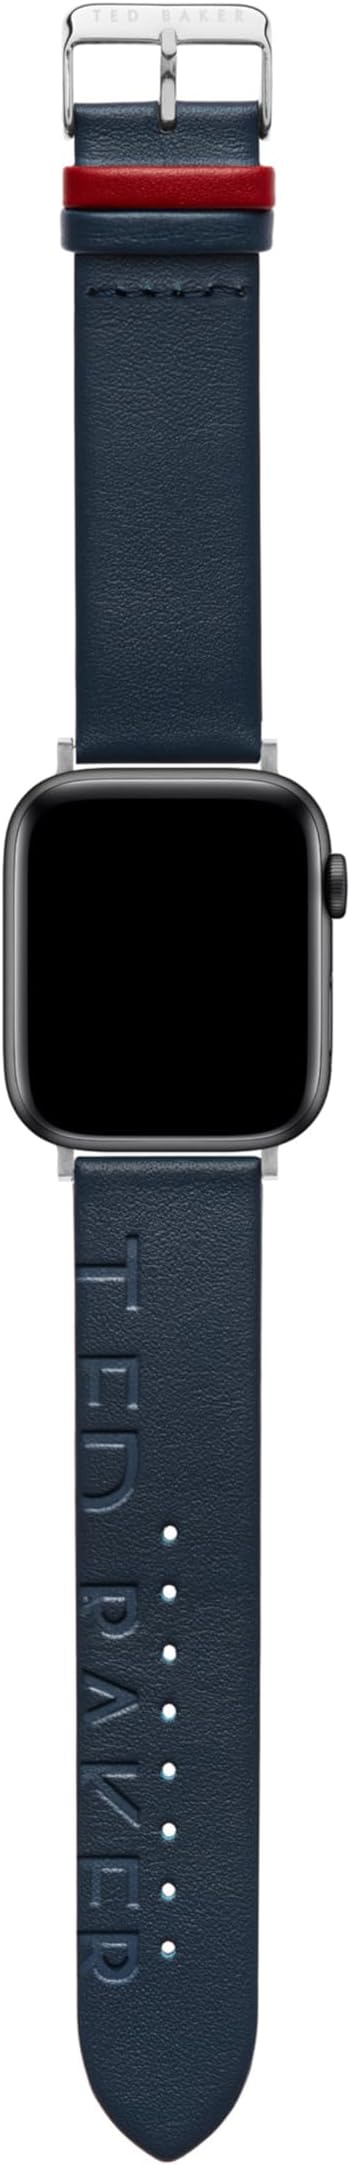 Ted Baker Strap for Apple Watch - BKS42F117